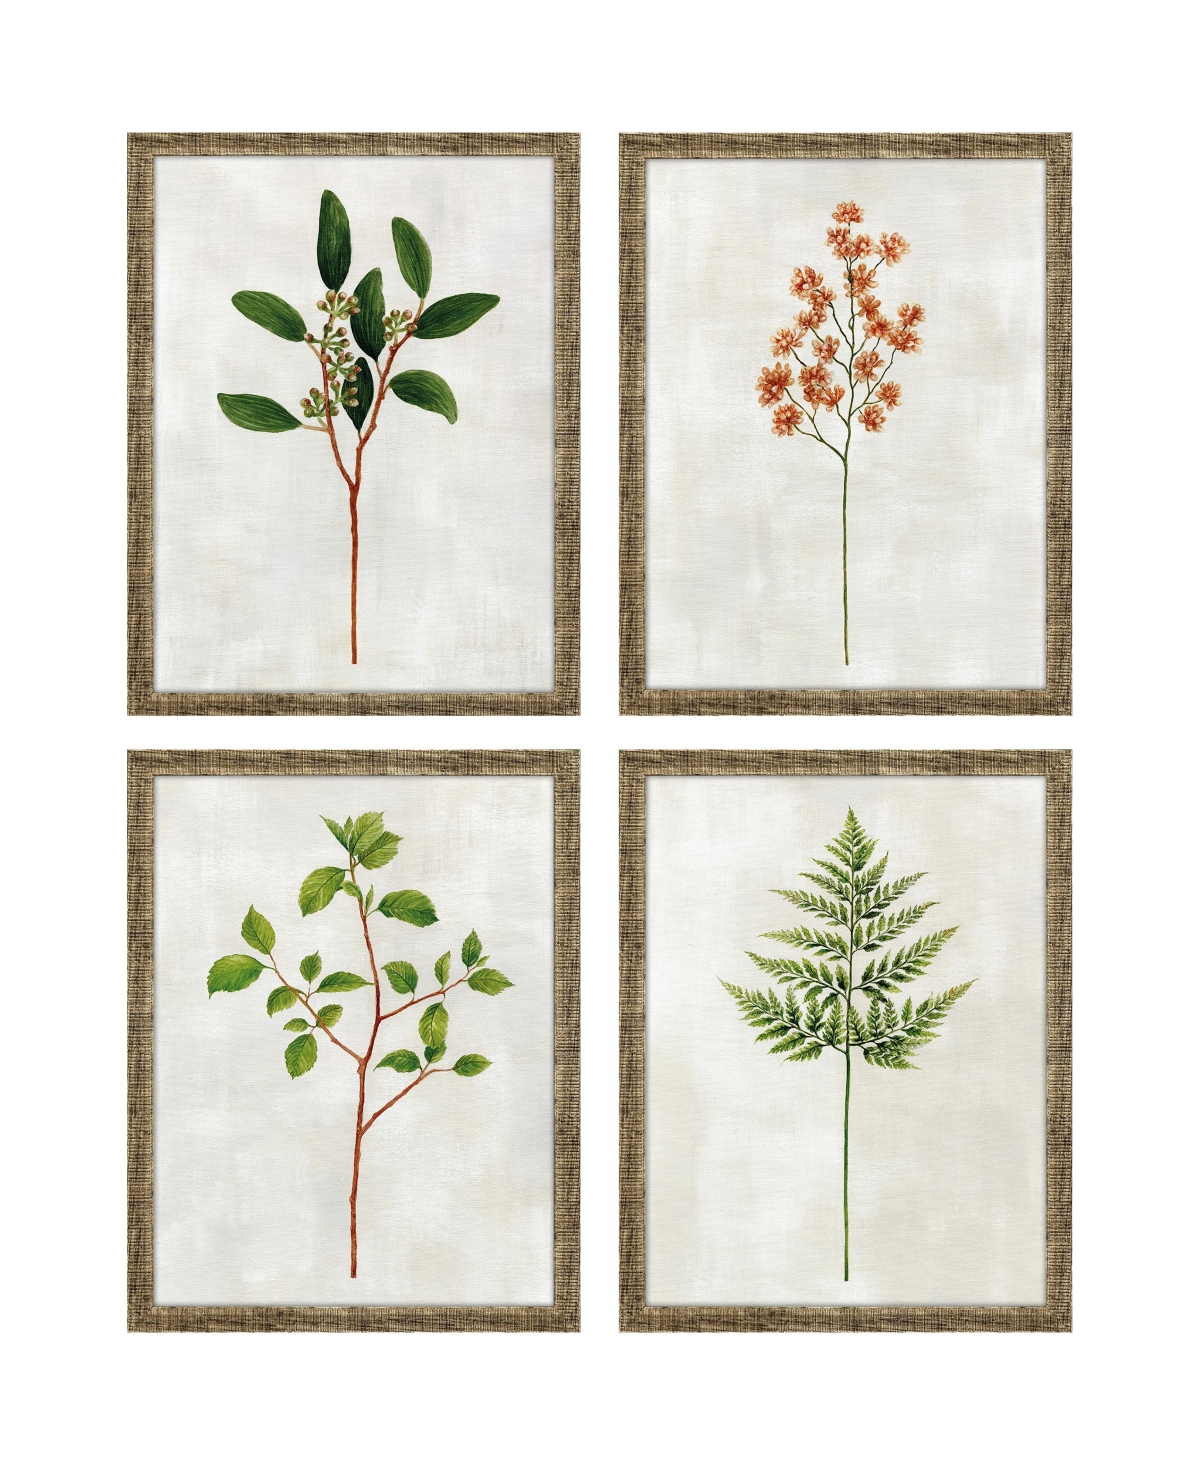 Paragon Picture Gallery Botanical I Framed Art, Set Of 4 In Green